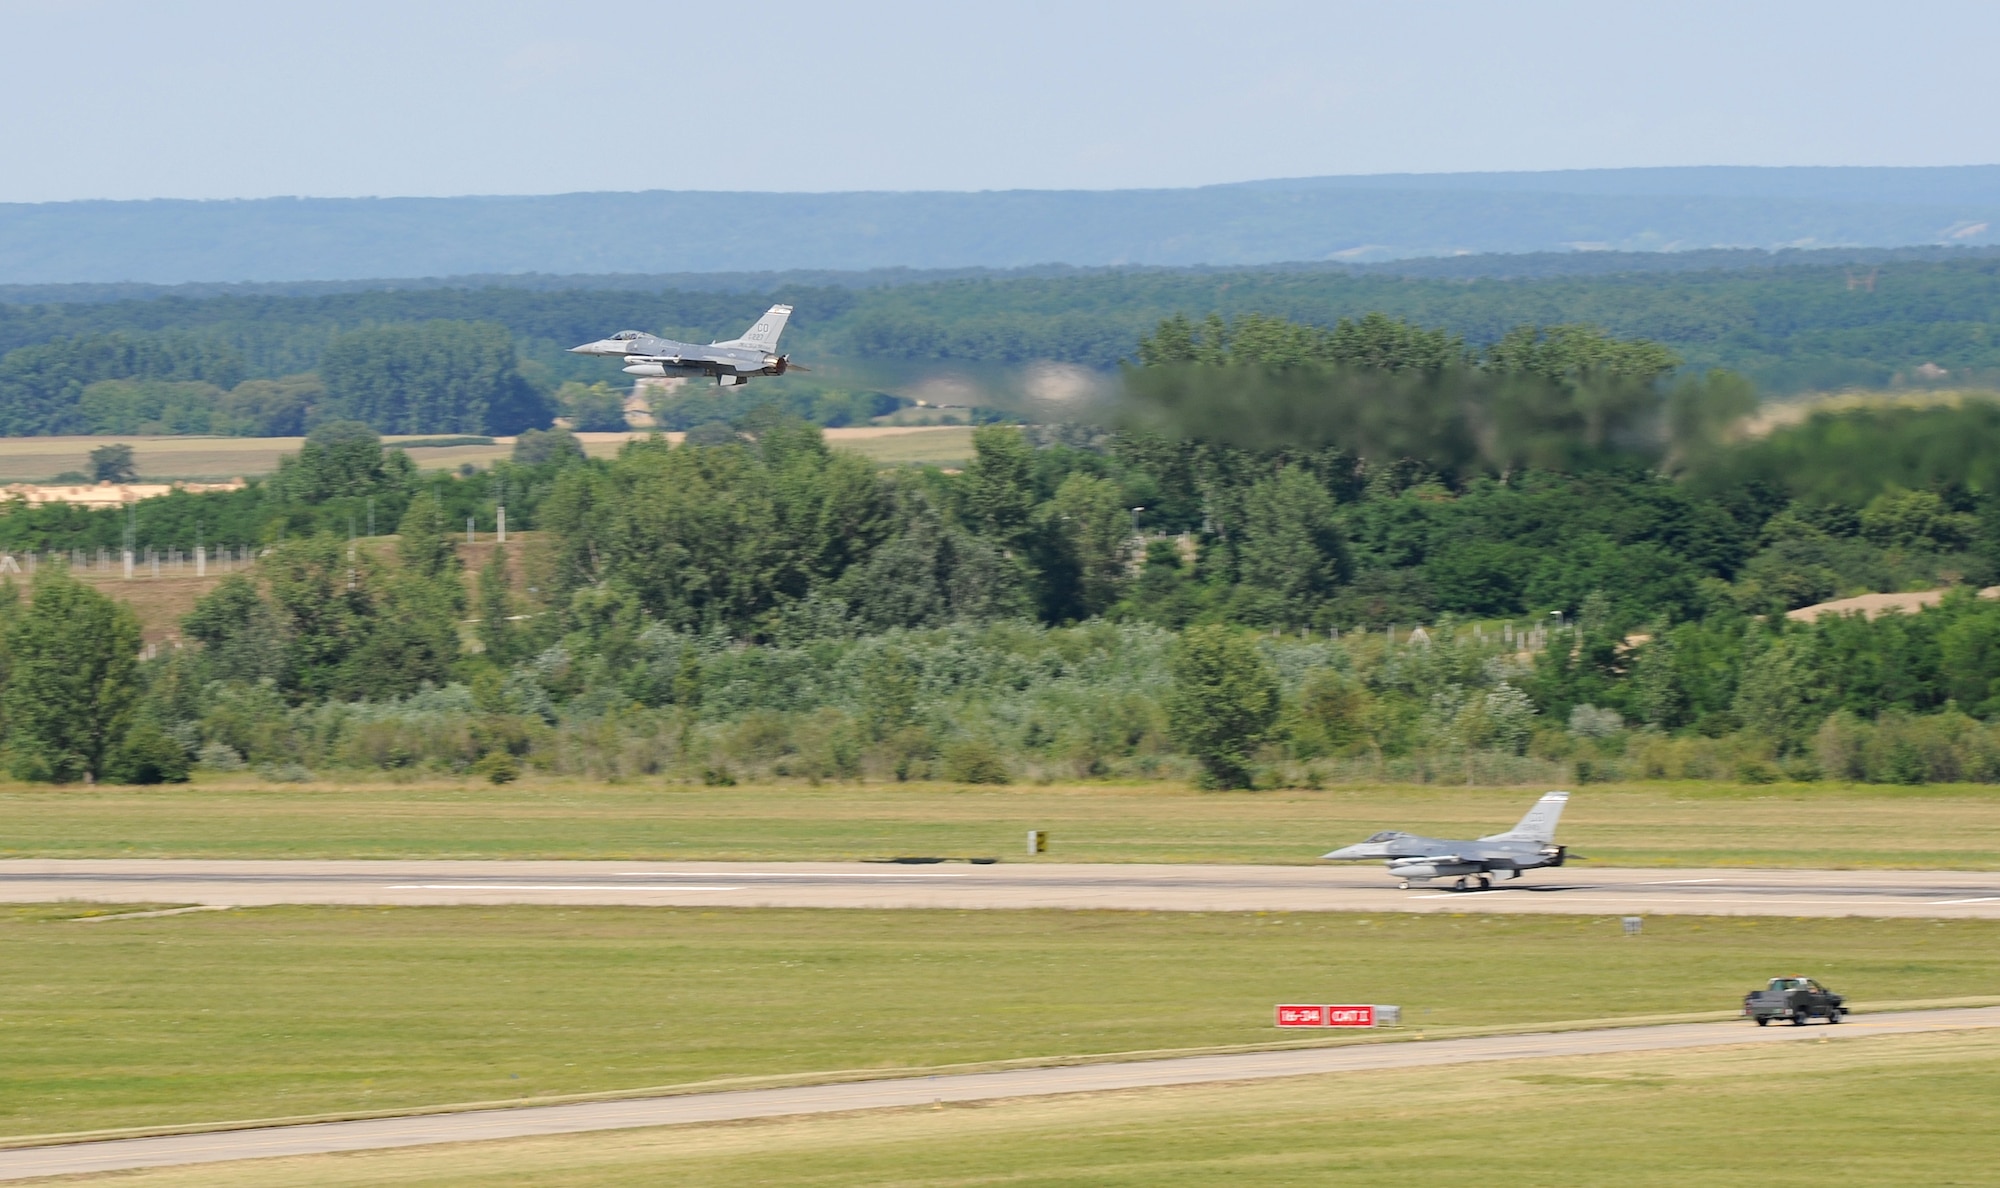 An F-16 Fighting Falcon aircraft from the 140th Wing, Colorado Air National Guard, makes a fly-by maneuver over a taxiing F-16 at Papa Air Base, Papa, Hungary after returning from a training mission in support of Operation Panther Strike. conjunction with Operation Atlantic Resolve, the 140th Wing, Colorado Air National Guard from Buckley Air Force Base, Colorado, has deployed approximately 200 Airmen to Papa Air Base, Hungary, to conduct familiarization training alongside our NATO ally, Hungary. They will also participate in cross-border training with other deployed U.S. forces' aircraft and NATO aircraft in the region. This deployment continues to demonstrate our commitment to our allies and European security and stability. (U.S. Air National Guard photo by Senior Master Sgt. John Rohrer) 